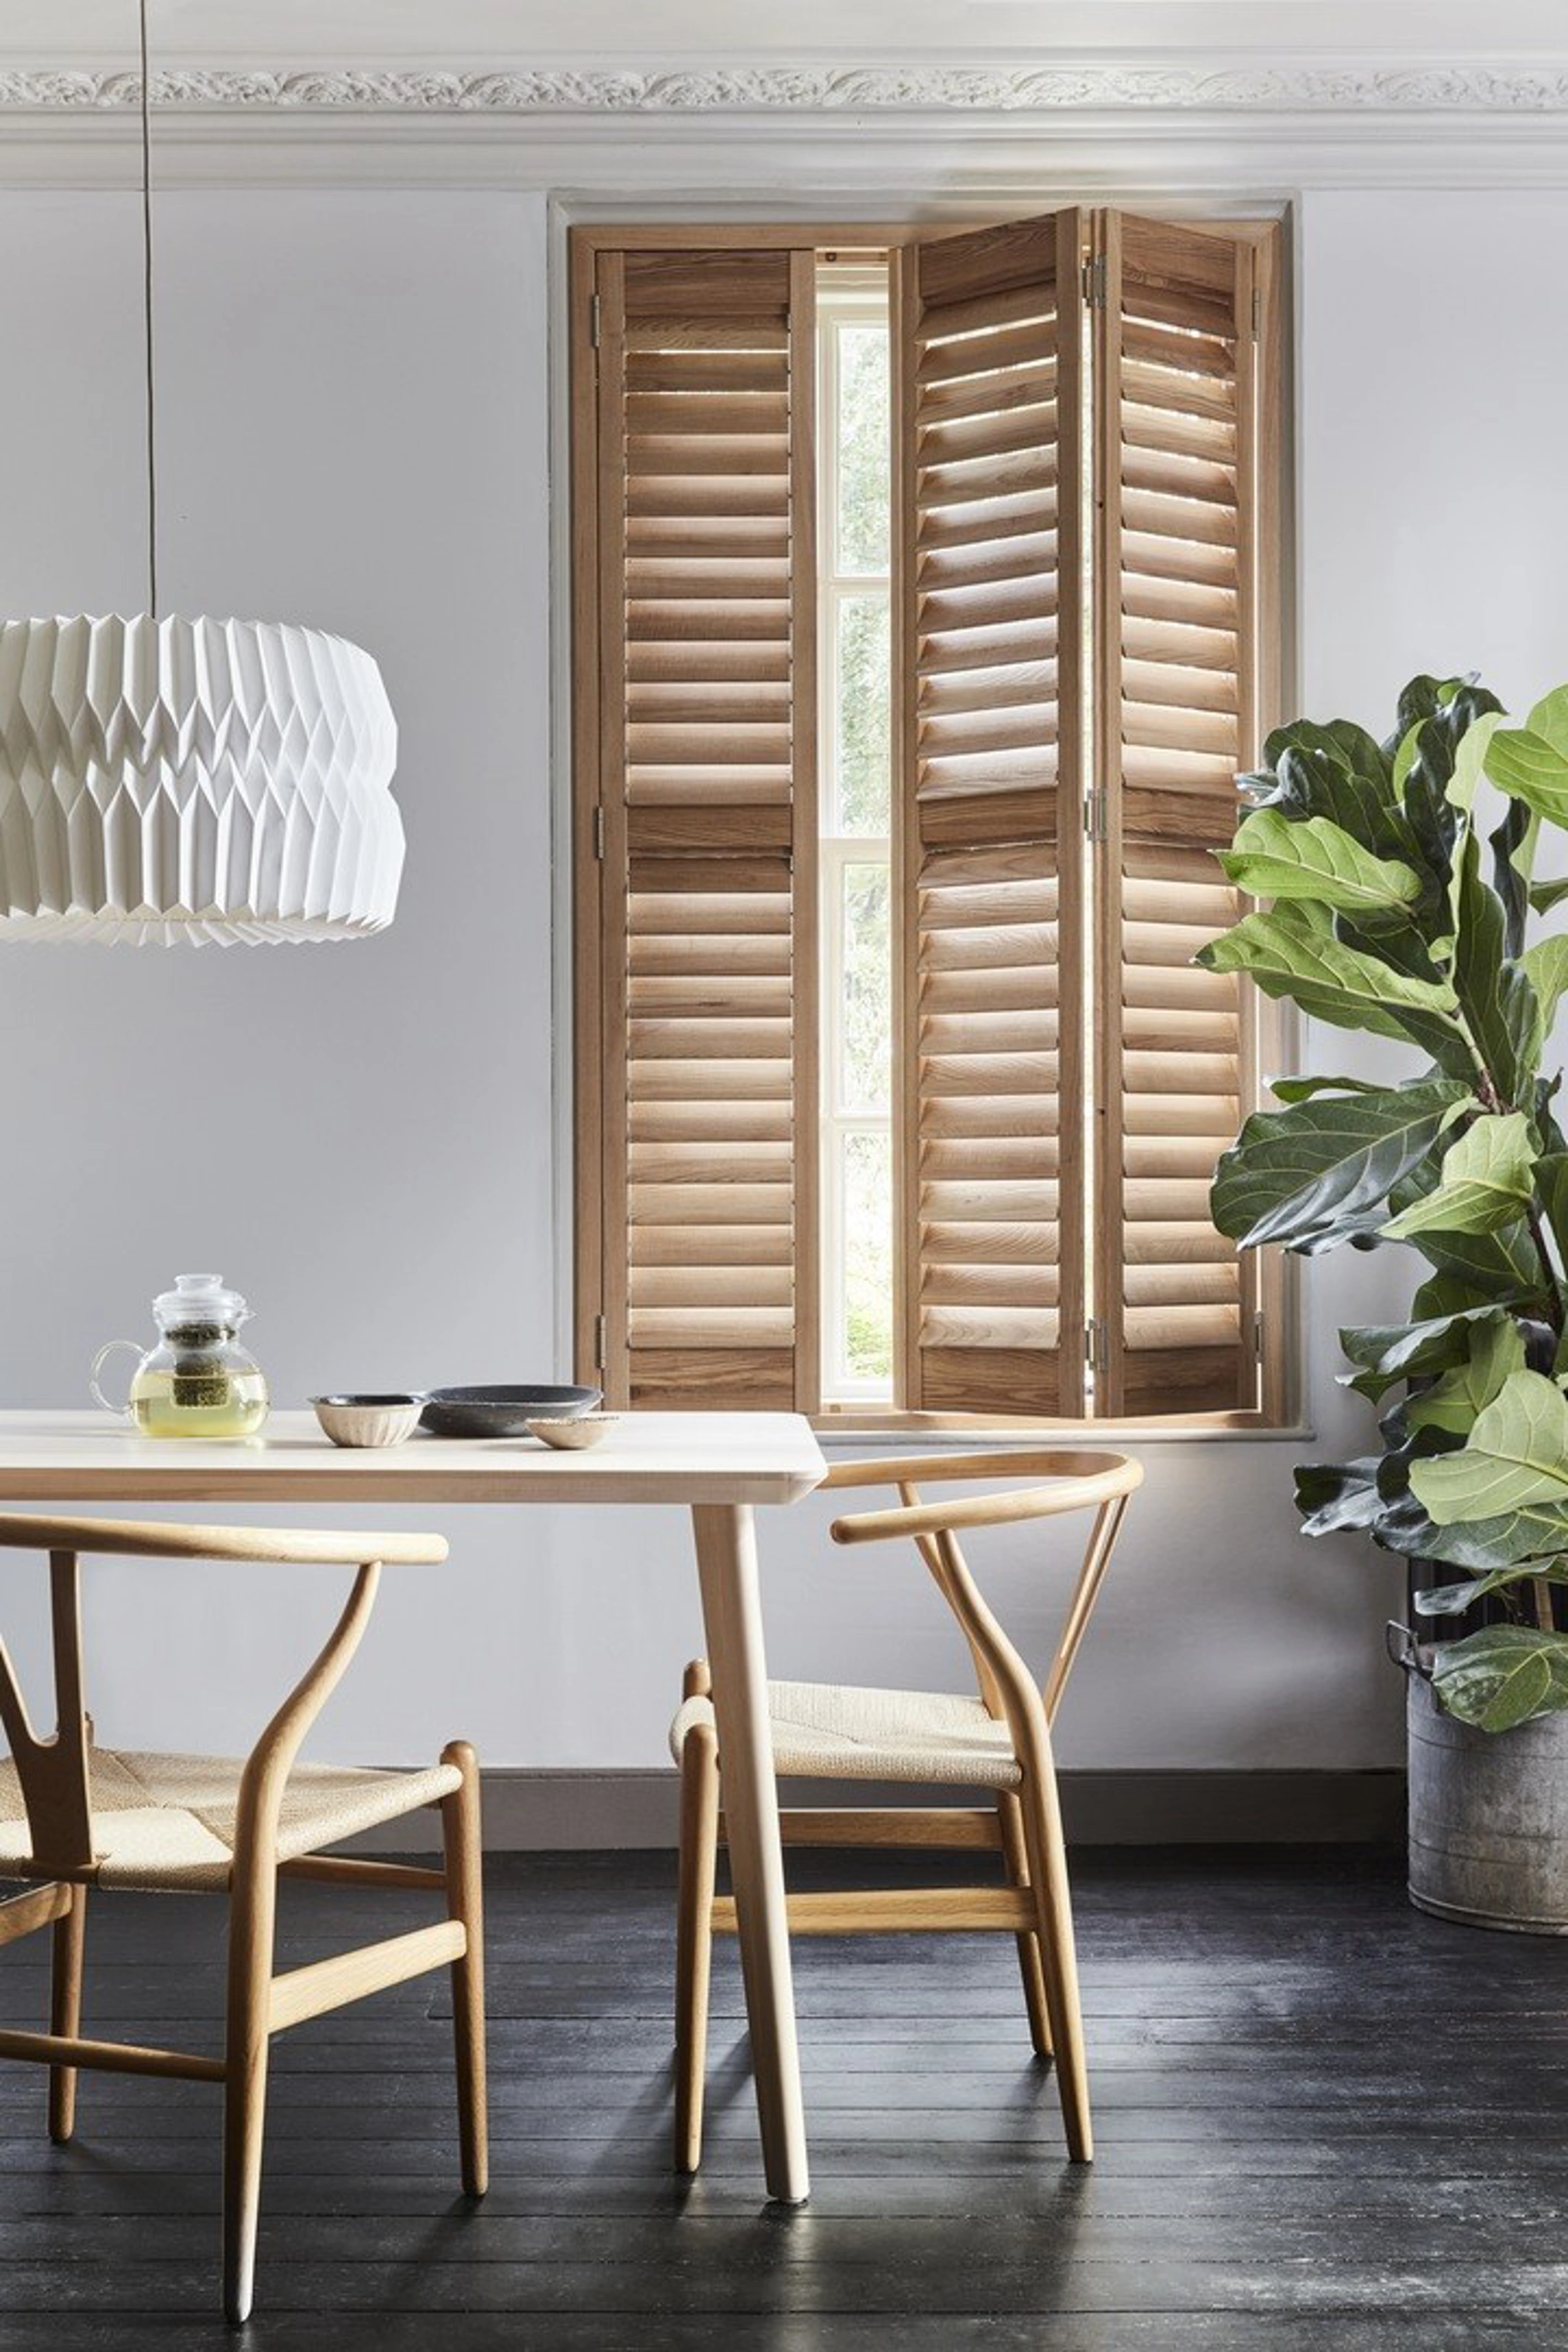 Honey Stained wooden interior shutters